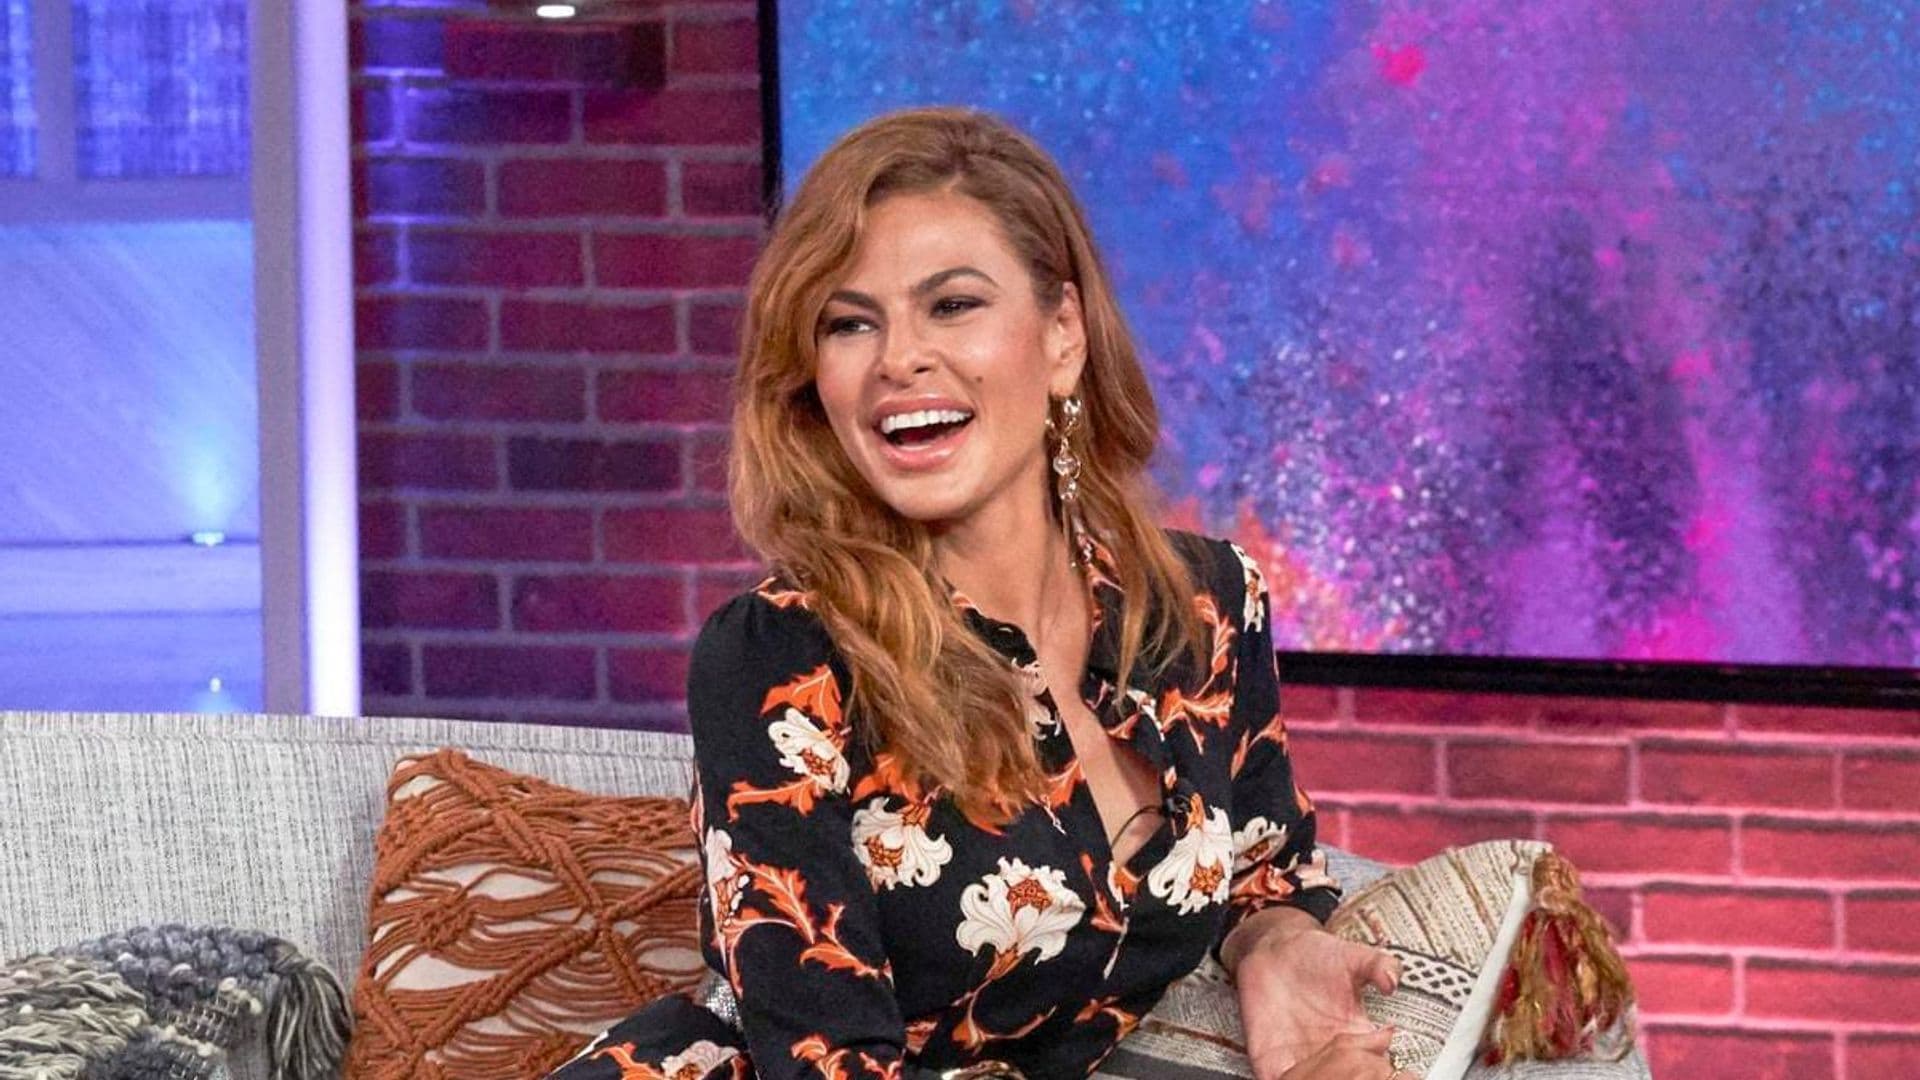 Eva Mendes shares why she’s happy to have had kids in her 40s; ‘I could not have raised kids in any other era’